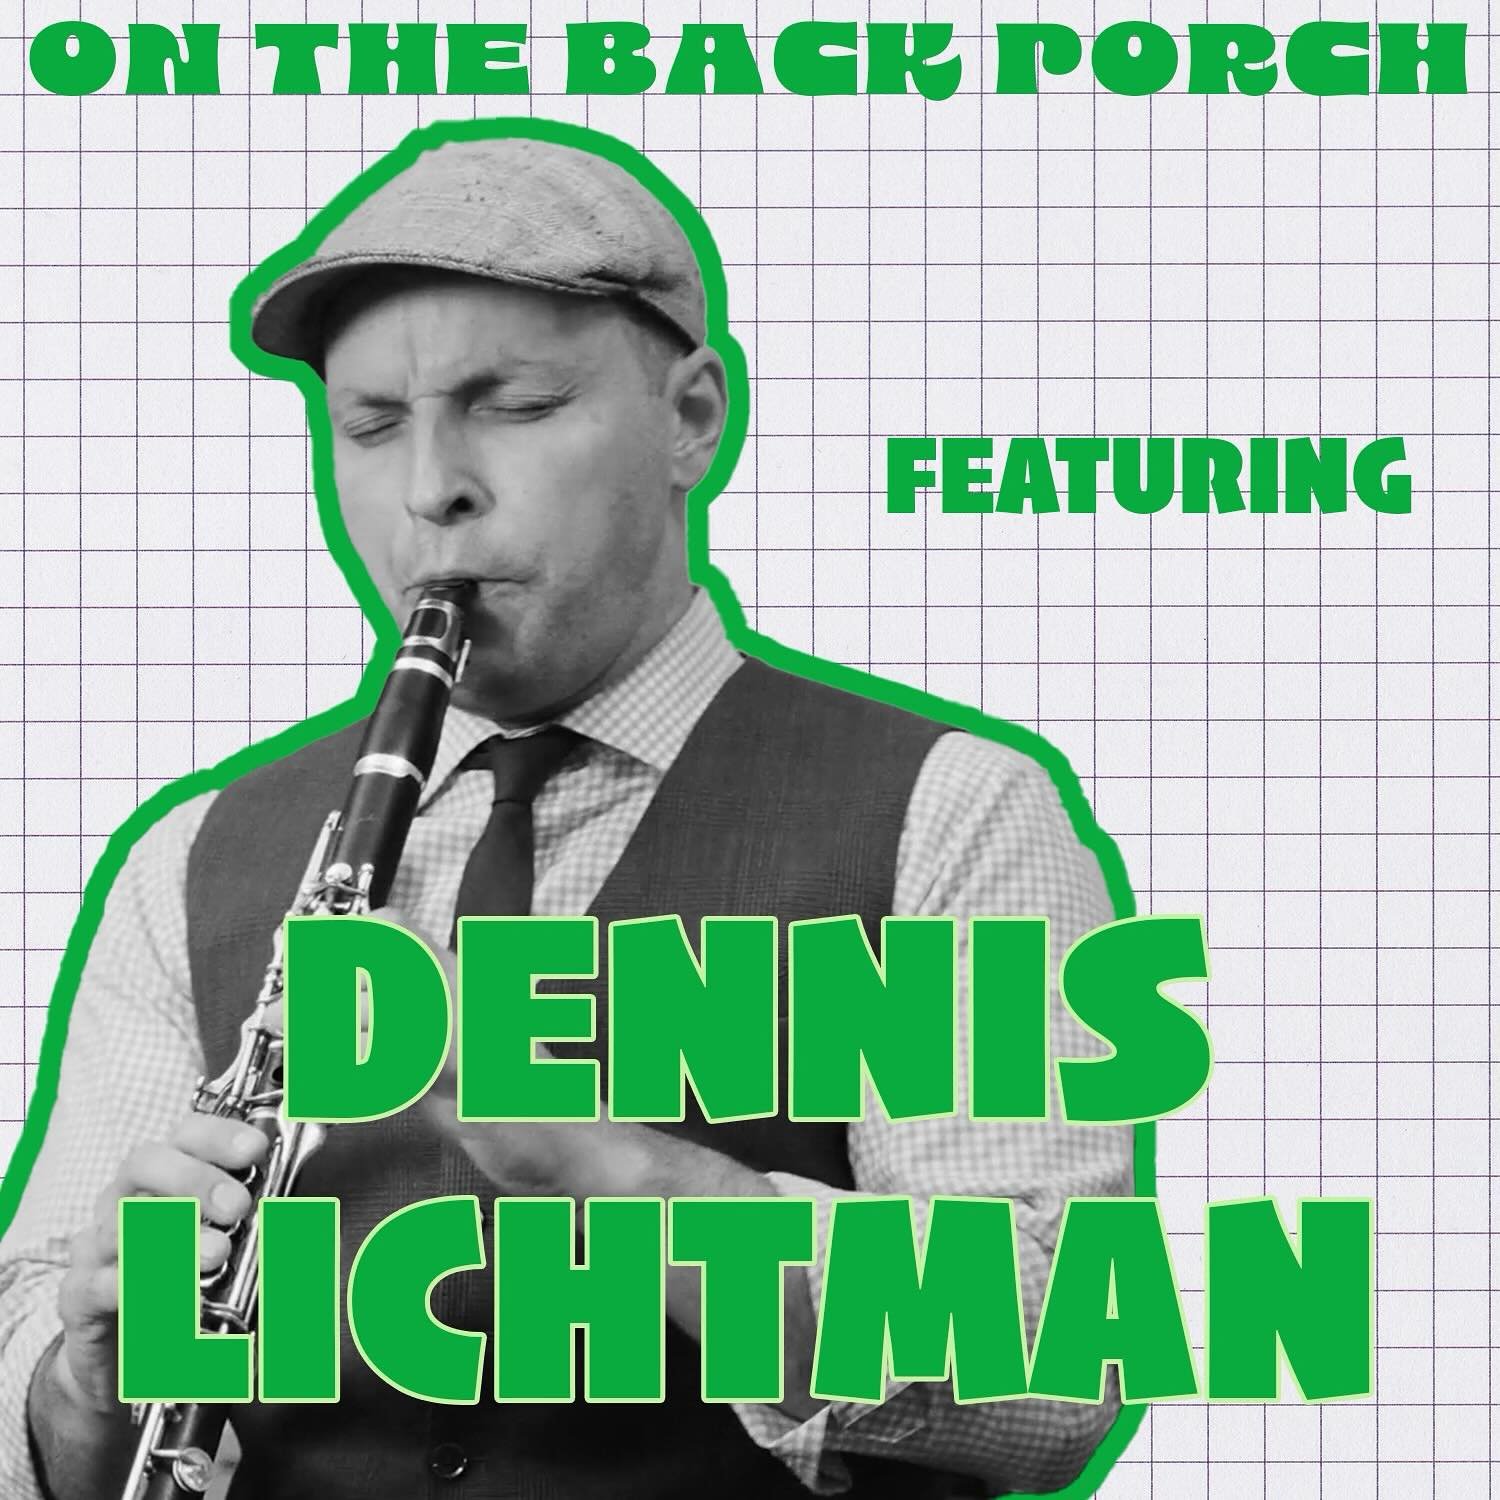 Happy Monday!! We are so excited to announce that the third episode of On The Back Porch Season 2 featuring @dennislichtman will be out Thursday! 
.
.
.
.
#dennislichtman #turtlebayrecords #onthebackporchseason2 #nycjazz #jazzmusician #jazzprodigy #s